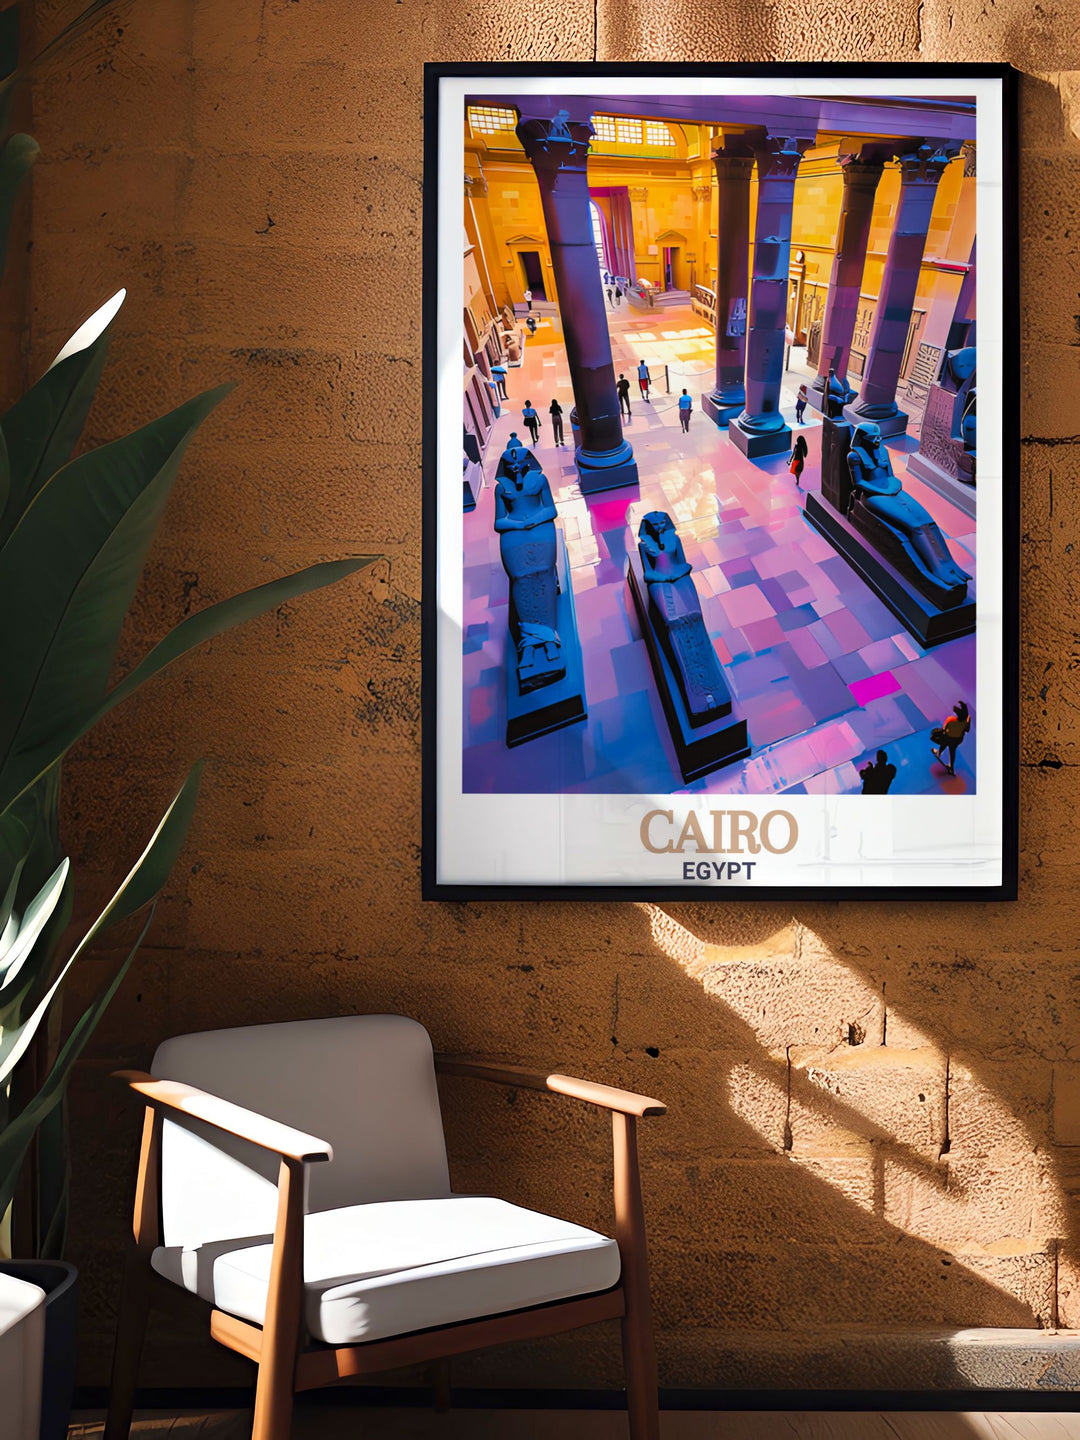 This high quality digital download of The Egyptian Museum in Cairo captures the essence of the cityscape and its rich history perfect for creating a stunning wall art display in your home.